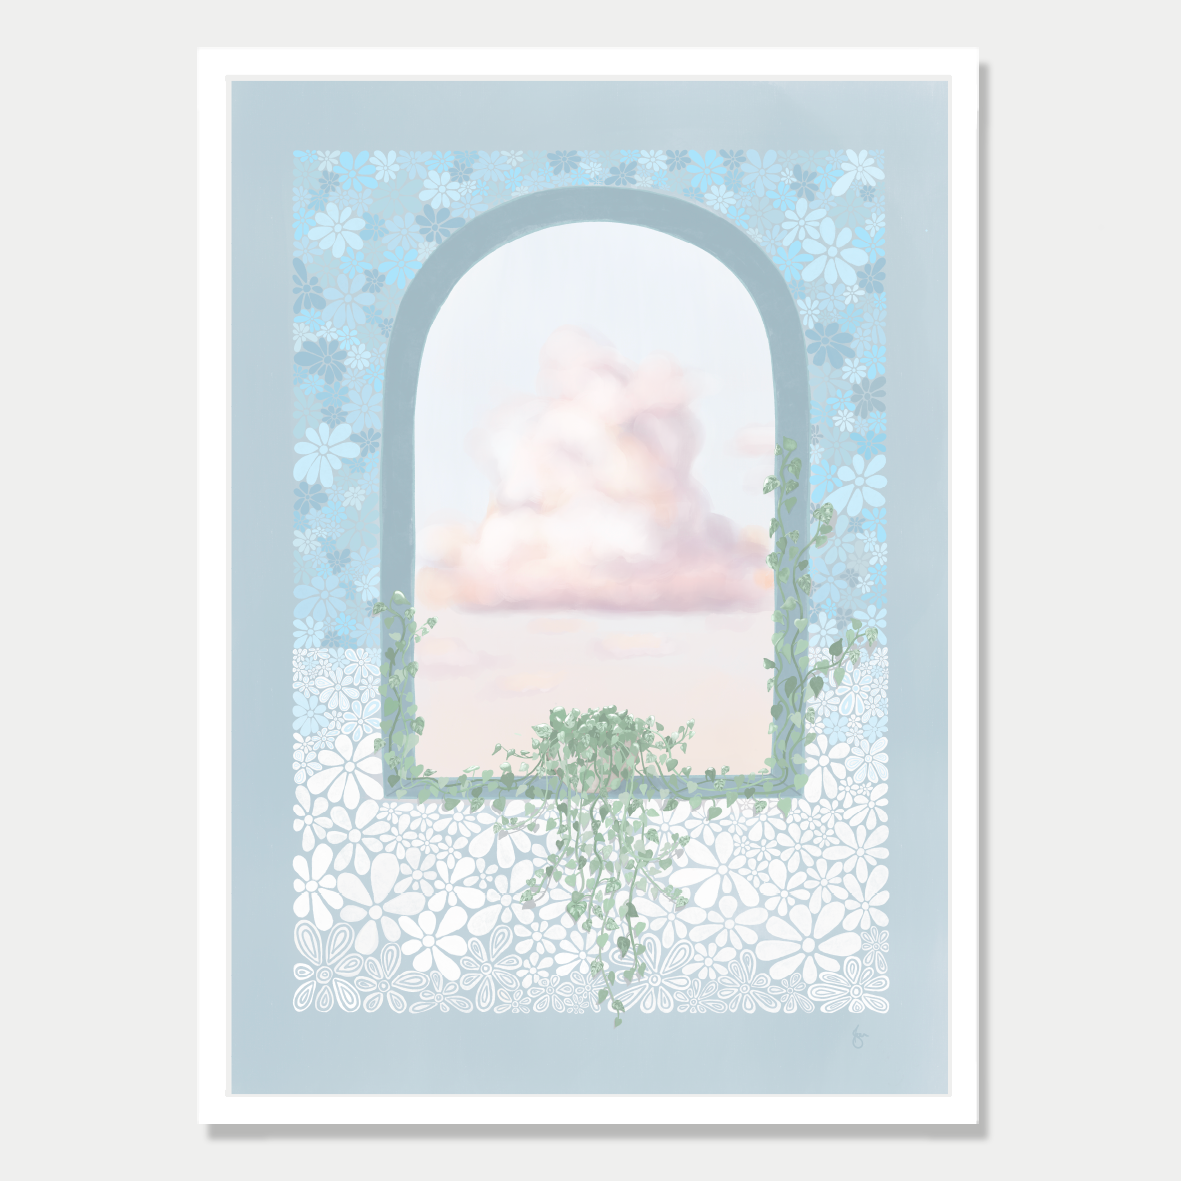 Art print of an arched window with a vine sitting in it, growing up the sides and a view of fluffy clouds, in a stone blue colour palette, by Bon Jung. Printed in New Zealand by endemicworld and framed in white.